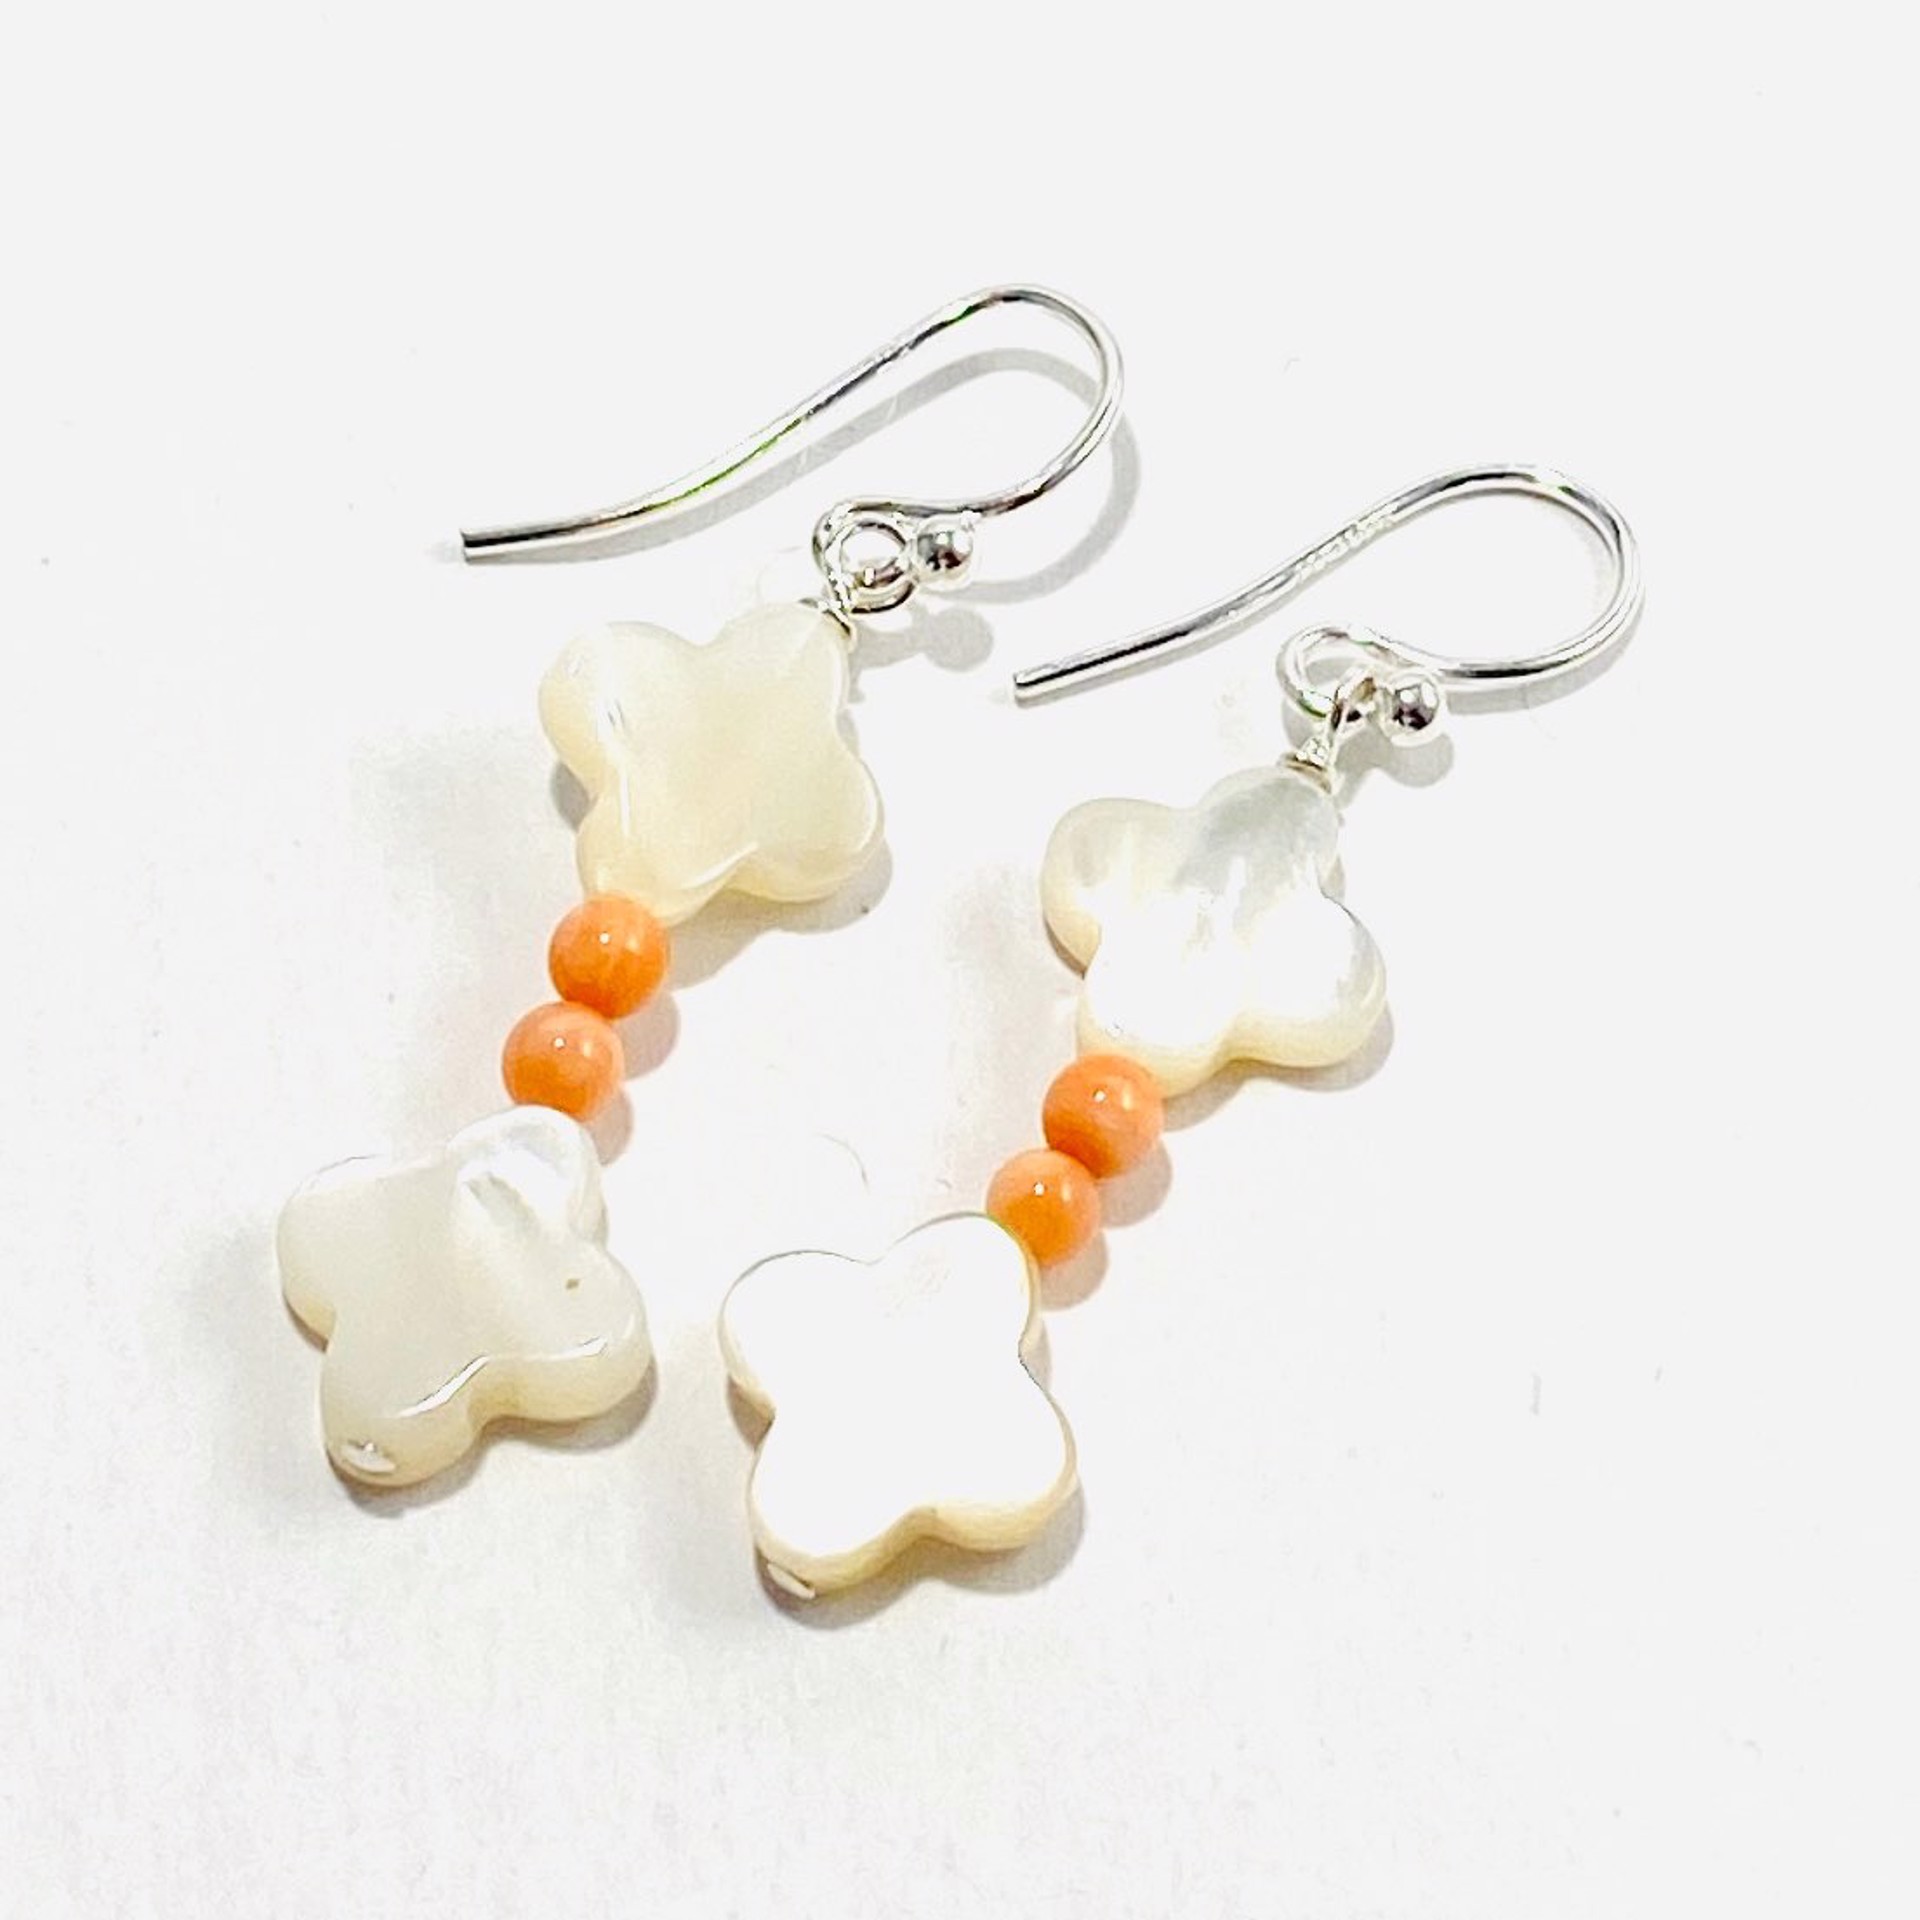 NT22-244 Mother Of Pearl Clover Coral Earrings by Nance Trueworthy